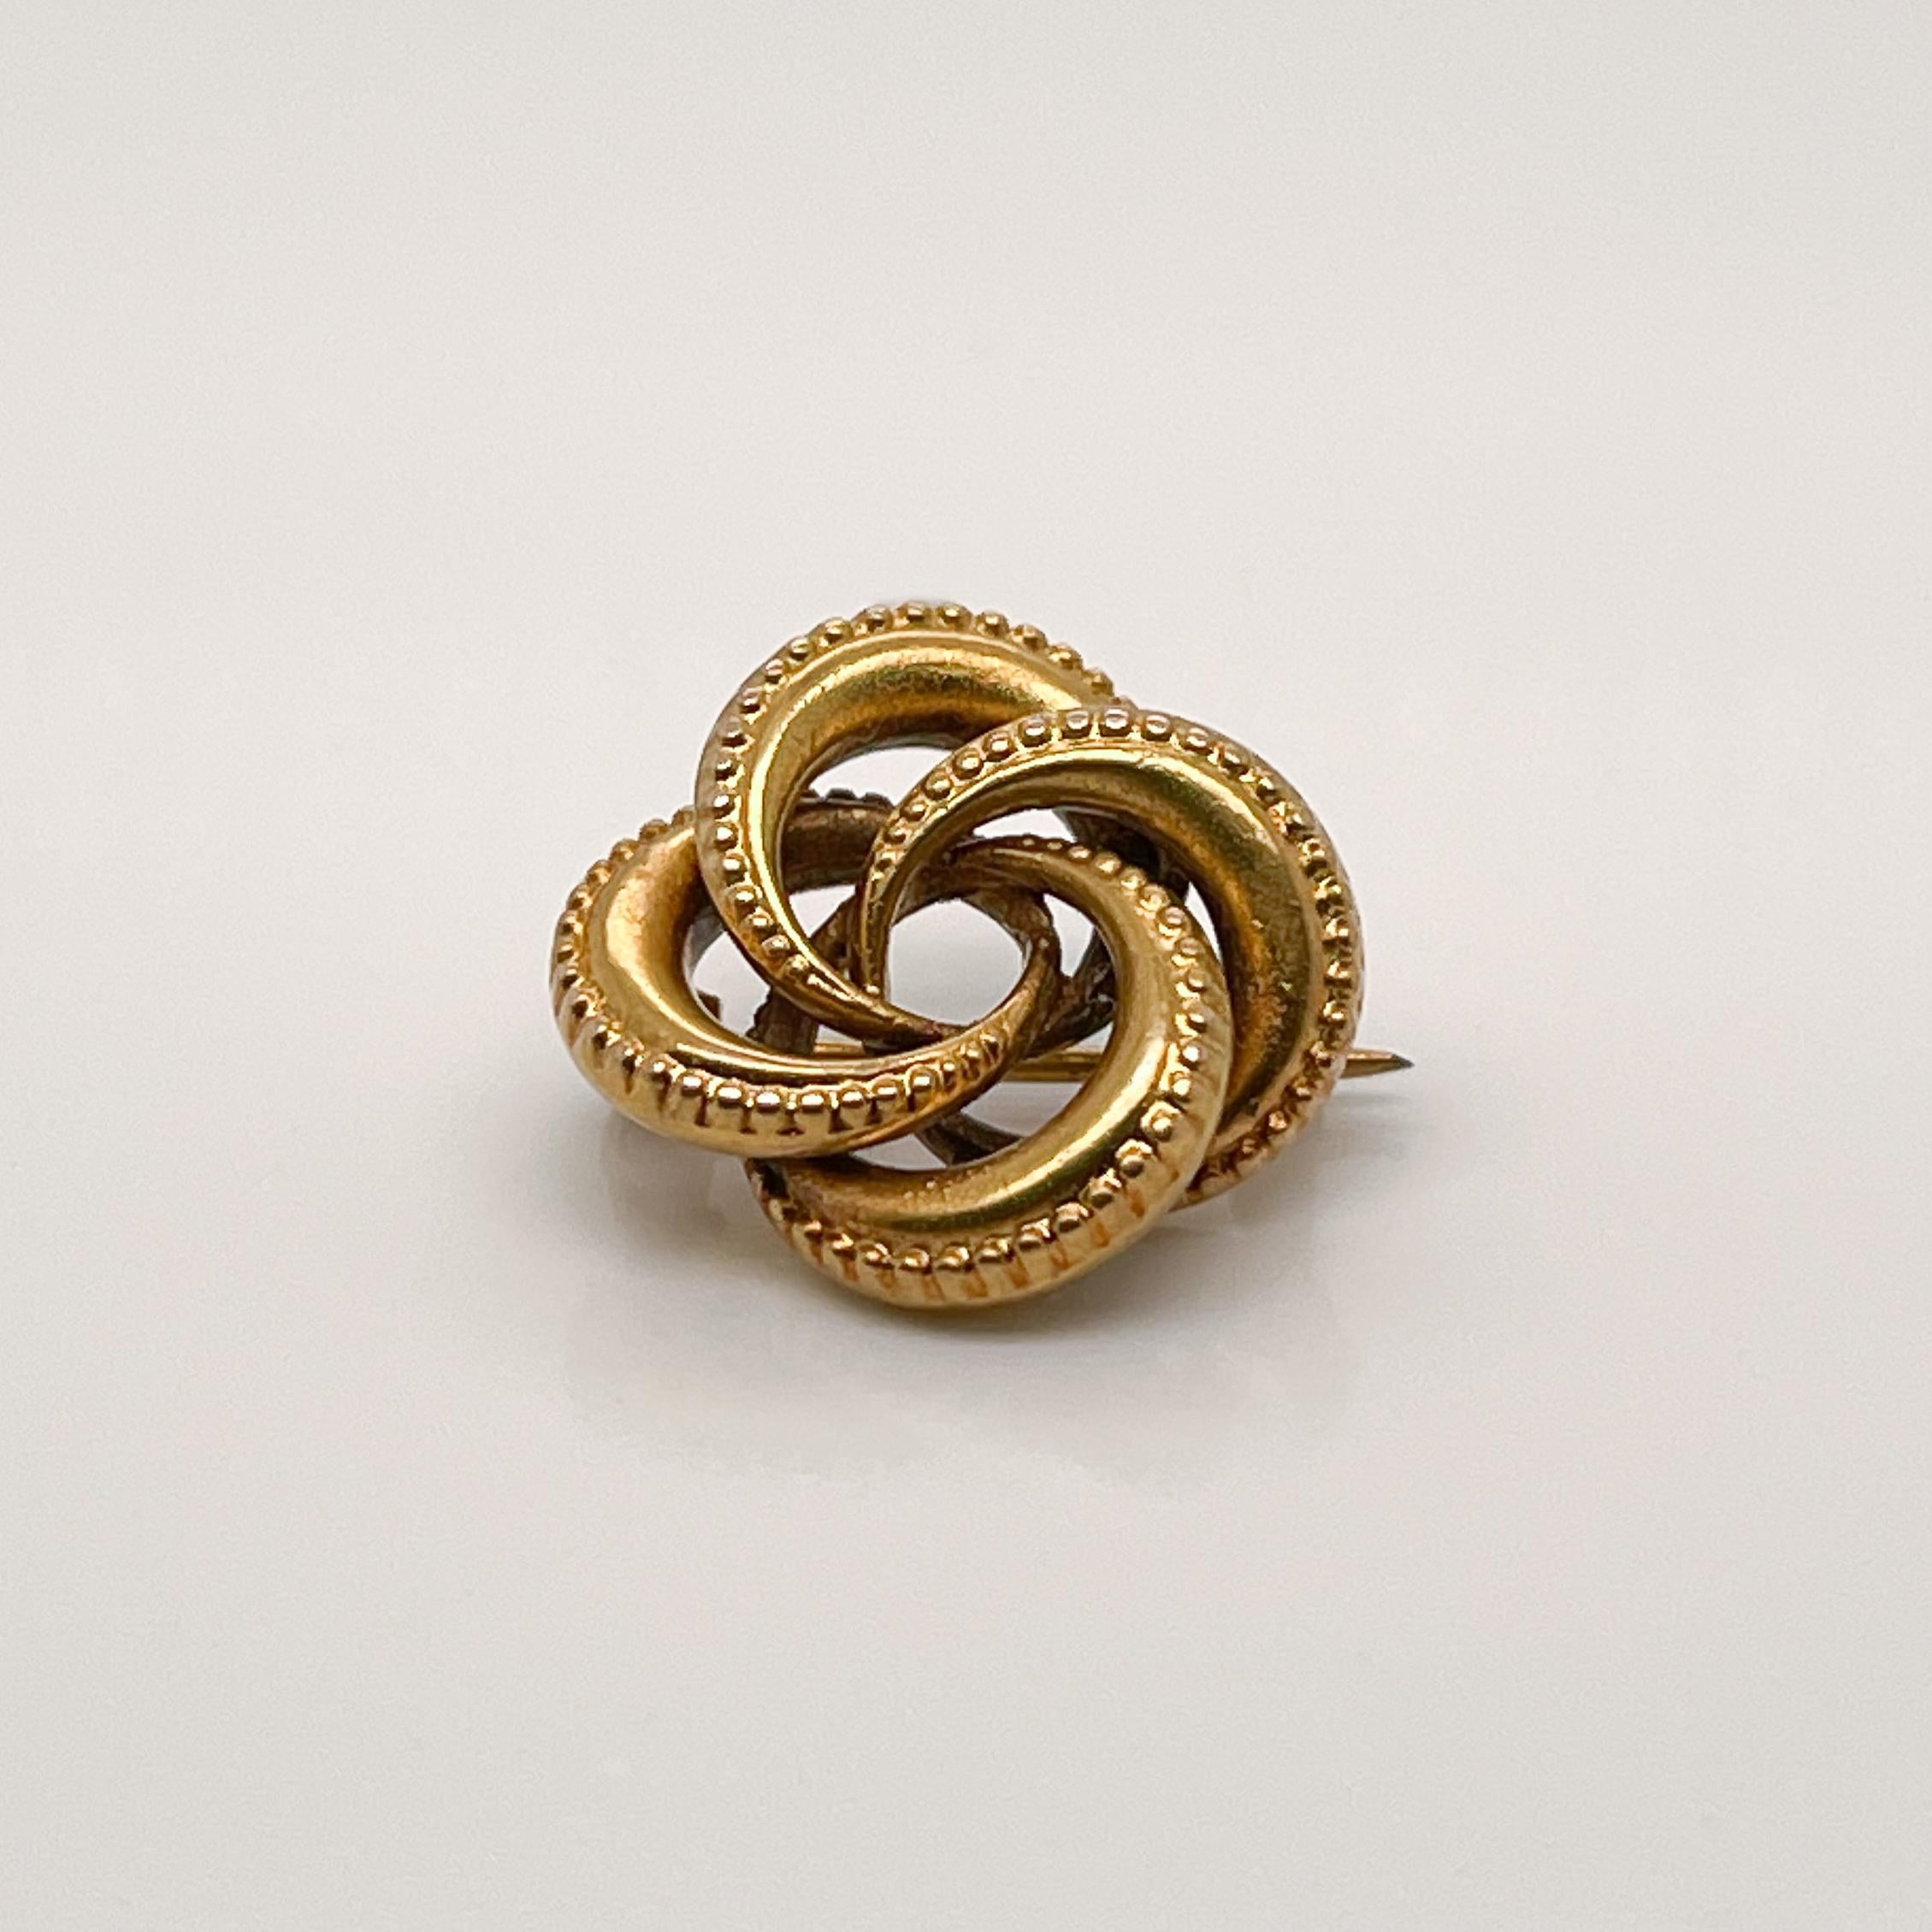 A fine Edwardian 18k gold brooch. 

In the form of a traditional 'Love Knot' with interlocking circular links.

Simply a wonderful, antique brooch! 

Date:
Late 19th or Early 20th Century

Overall Condition:
It is in overall good, as-pictured, used